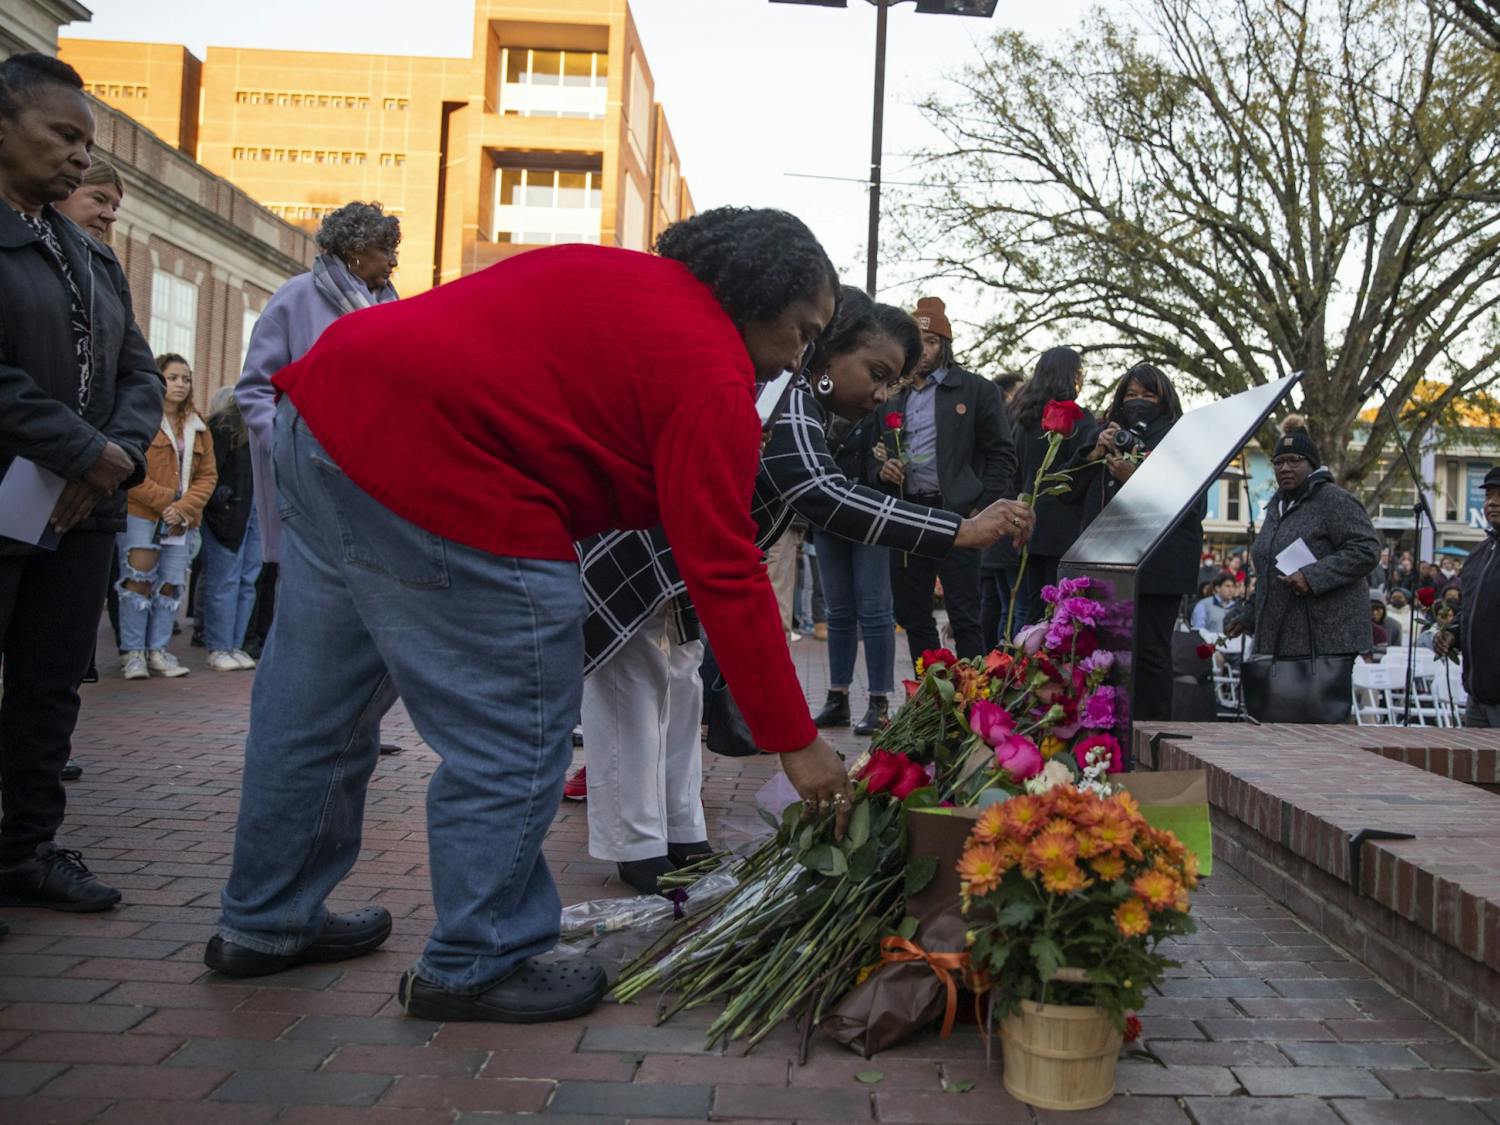 Family members and community members lay flowers at the memorial for James Lewis Cates, Jr. after its dedication on Monday, Nov. 21, 2022.